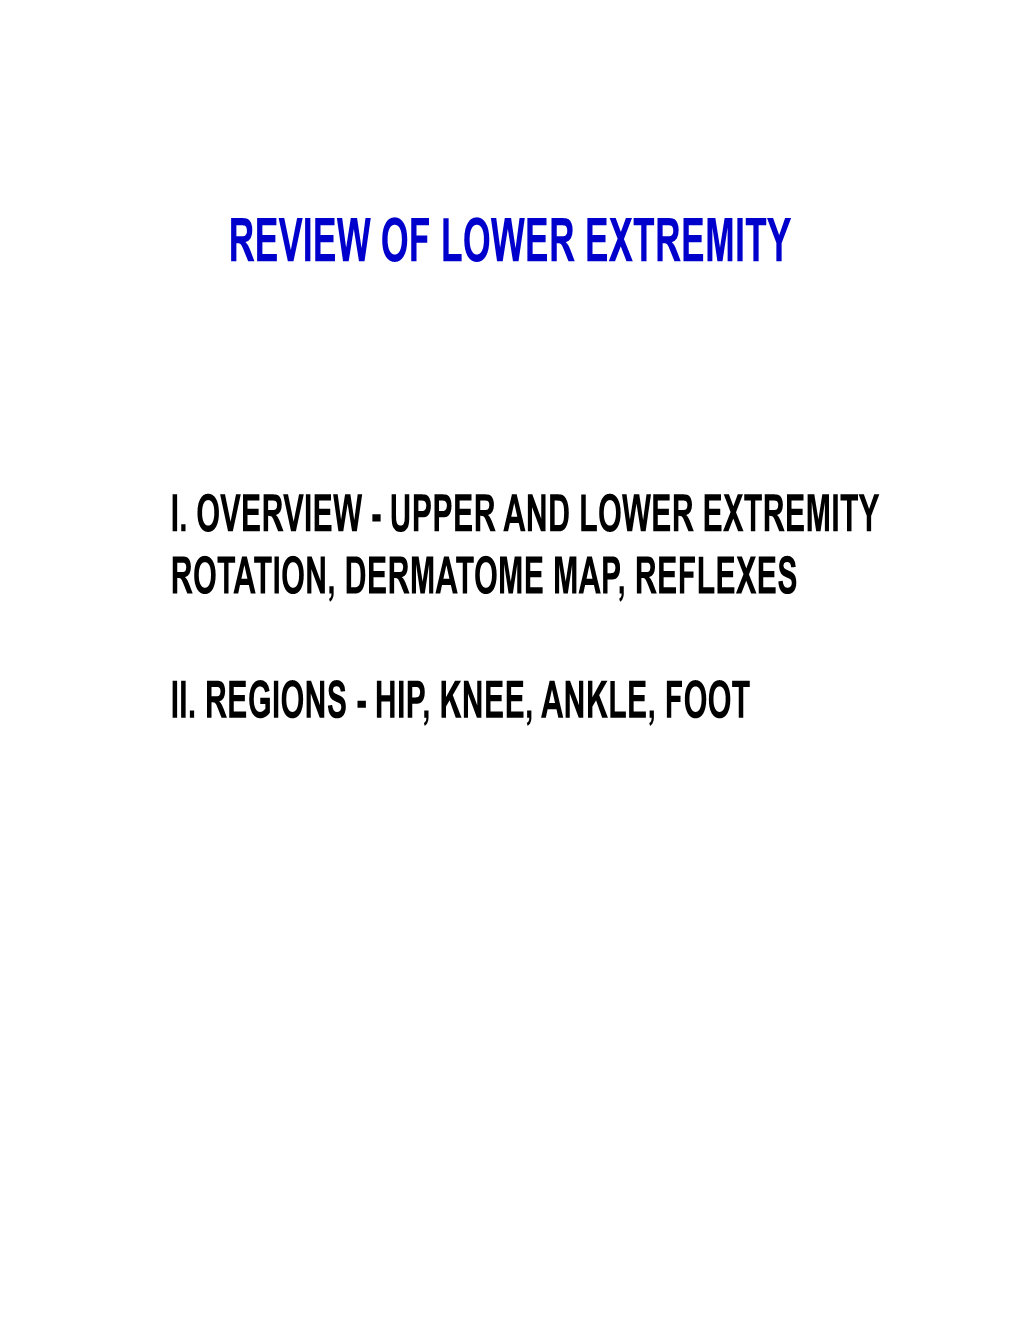 Review of Lower Extremity